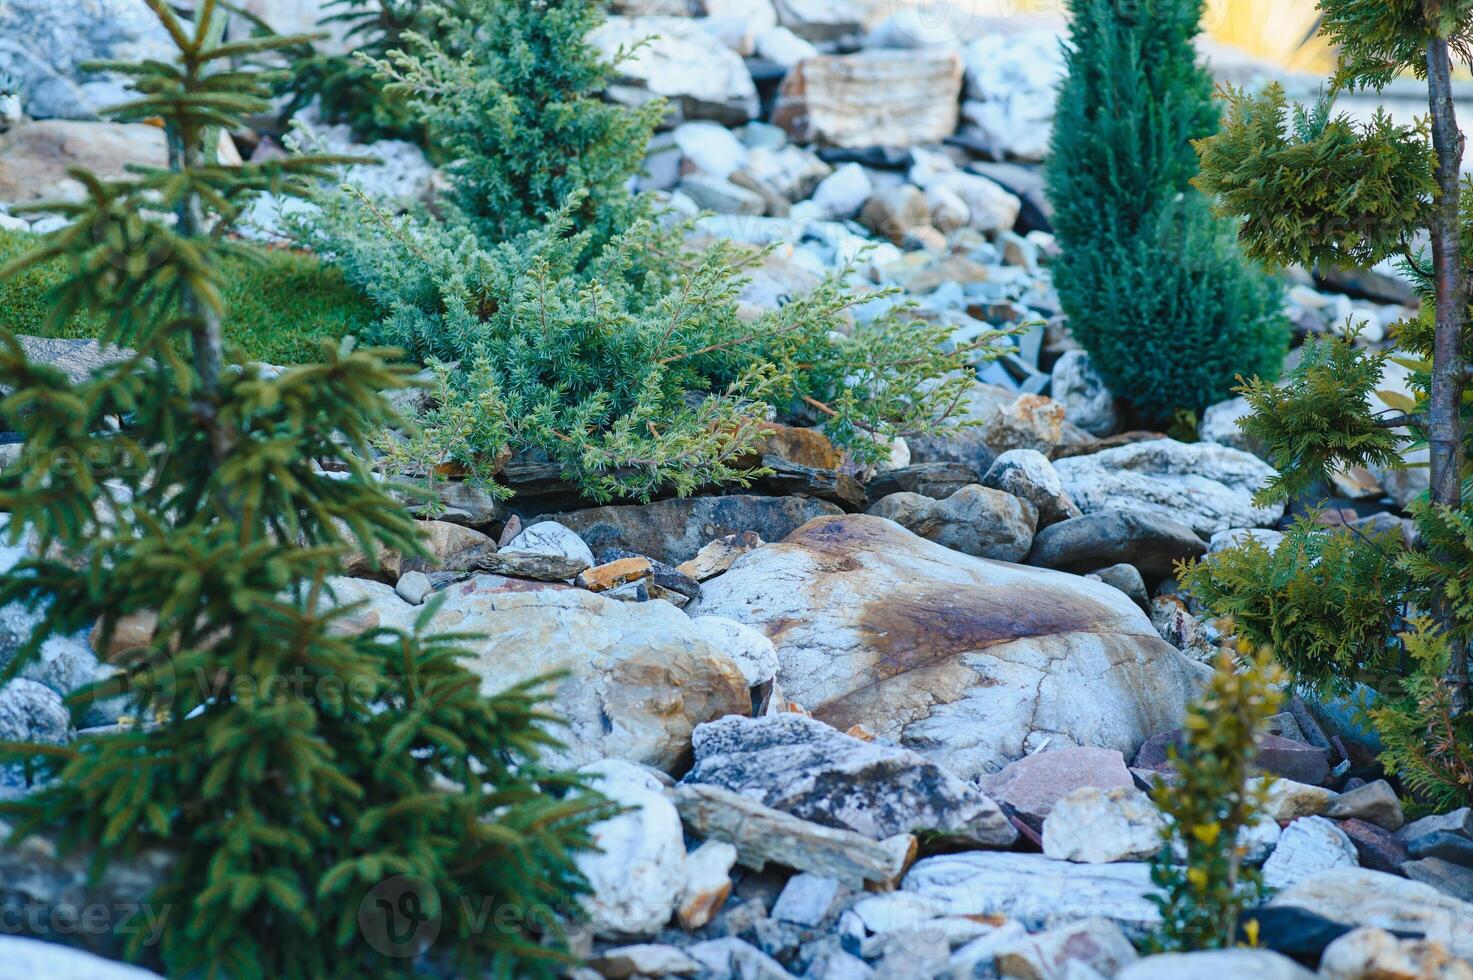 Coniferous rockery in landscaping. Different types of pine and spruce with different color needles photo